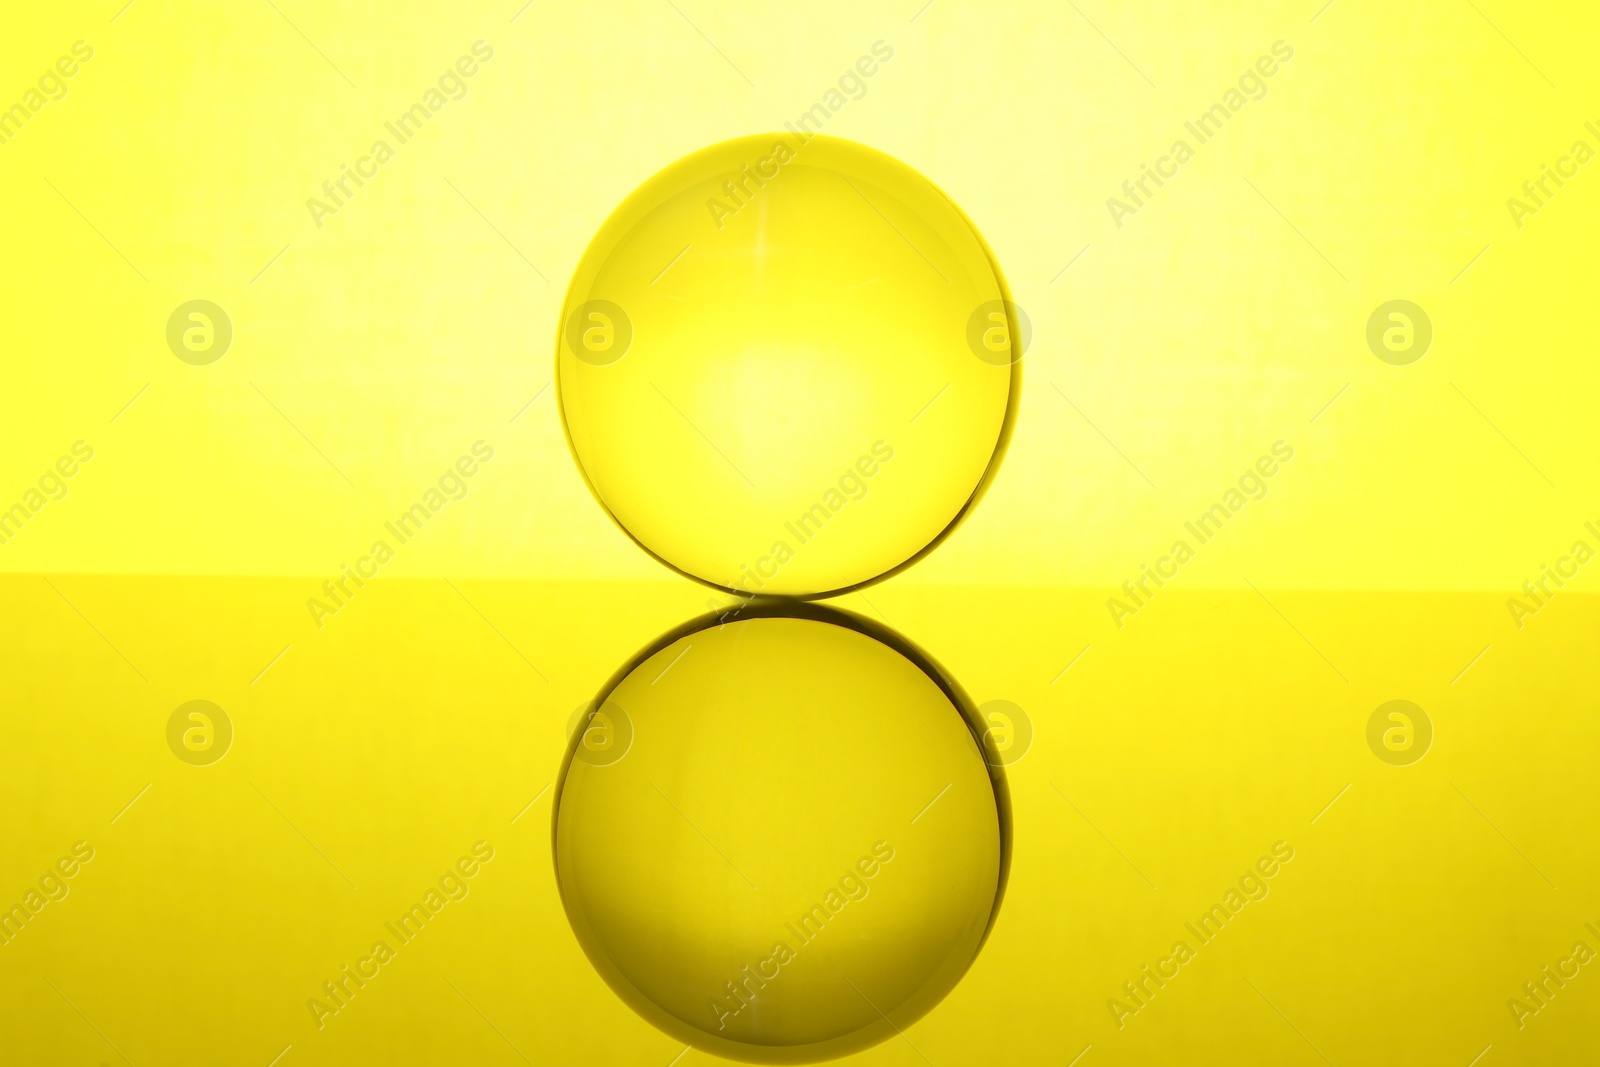 Photo of Transparent glass ball on mirror surface against yellow background